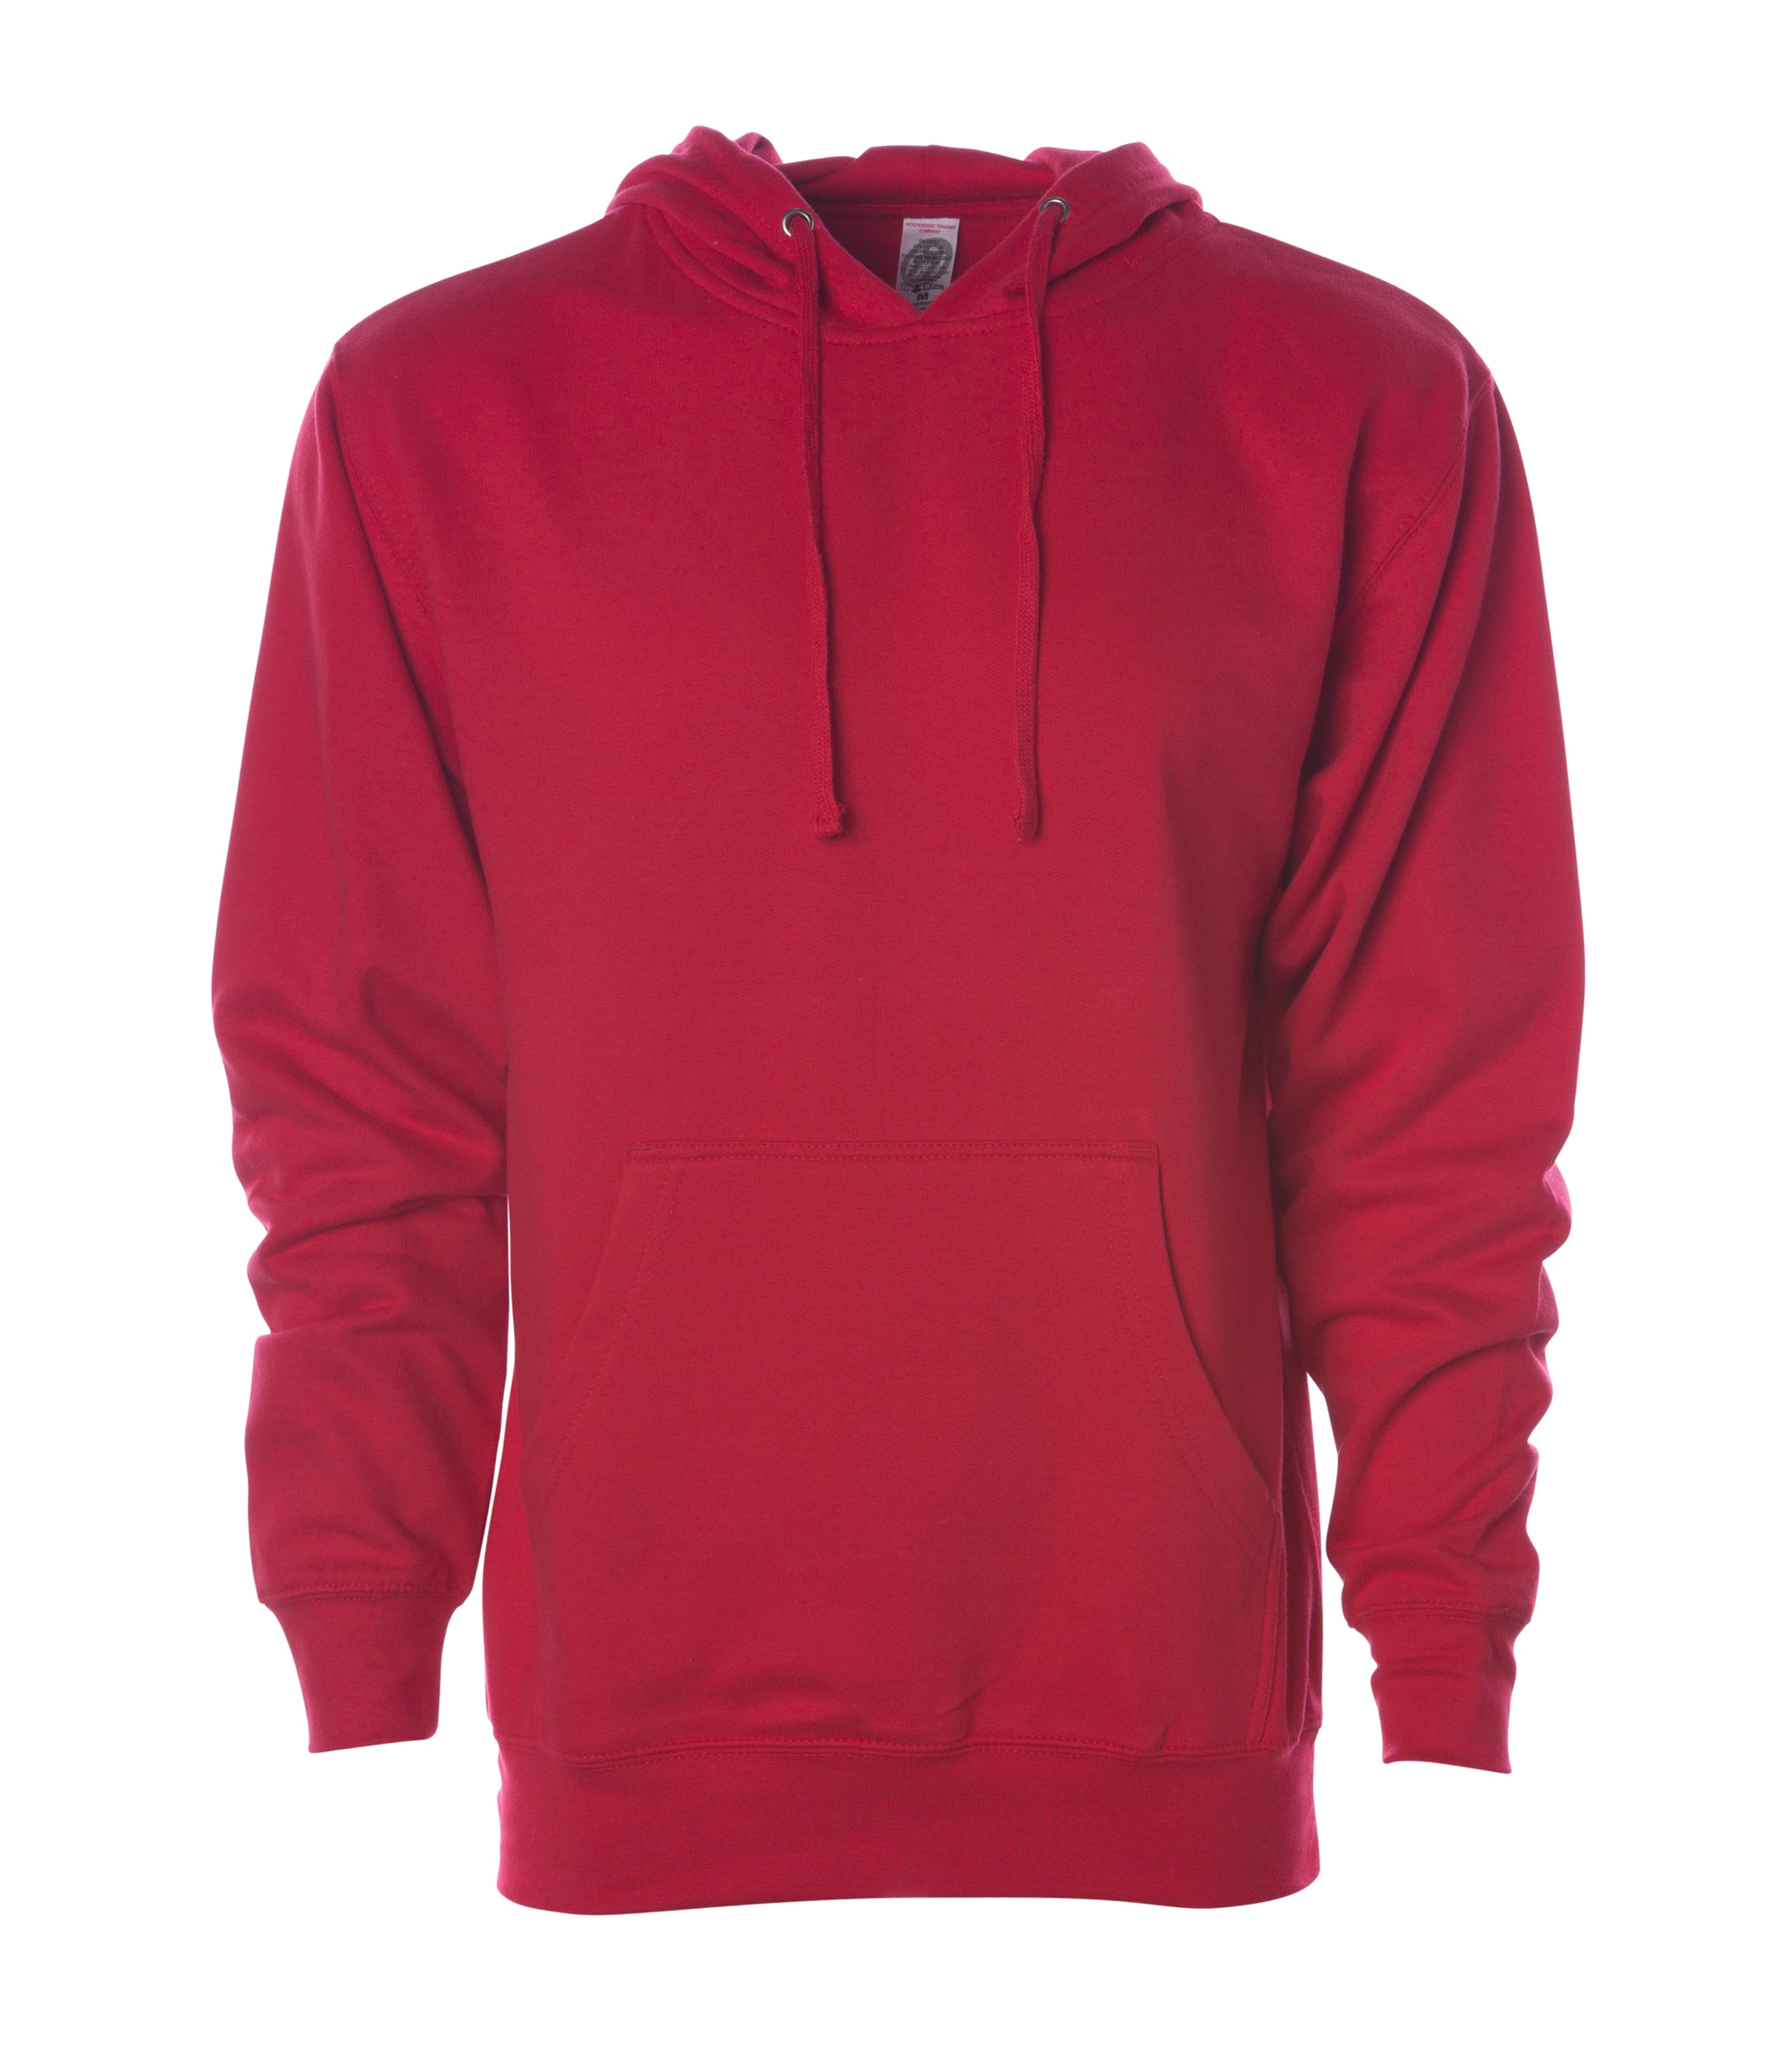 4XL & 5XL Midweight Hooded Pullover Sweatshirts | Independent Trading ...